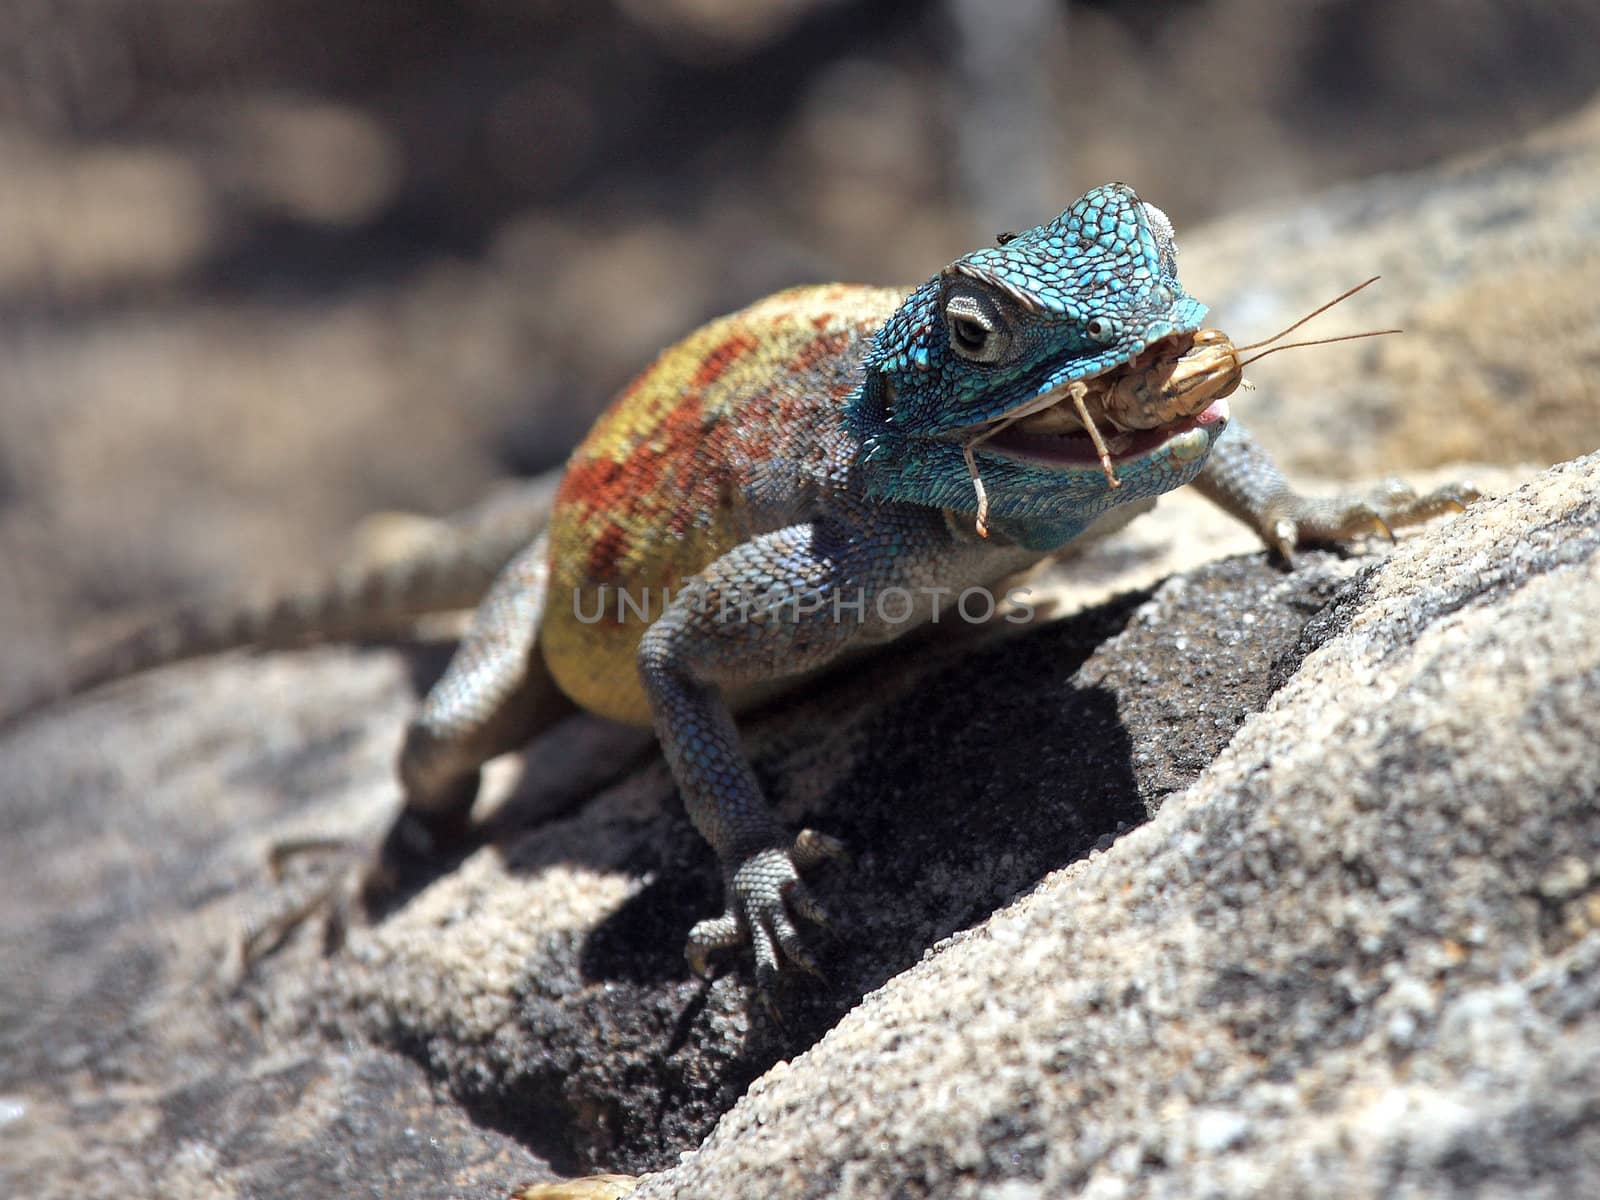 Southern Rock Agama chewing a locust